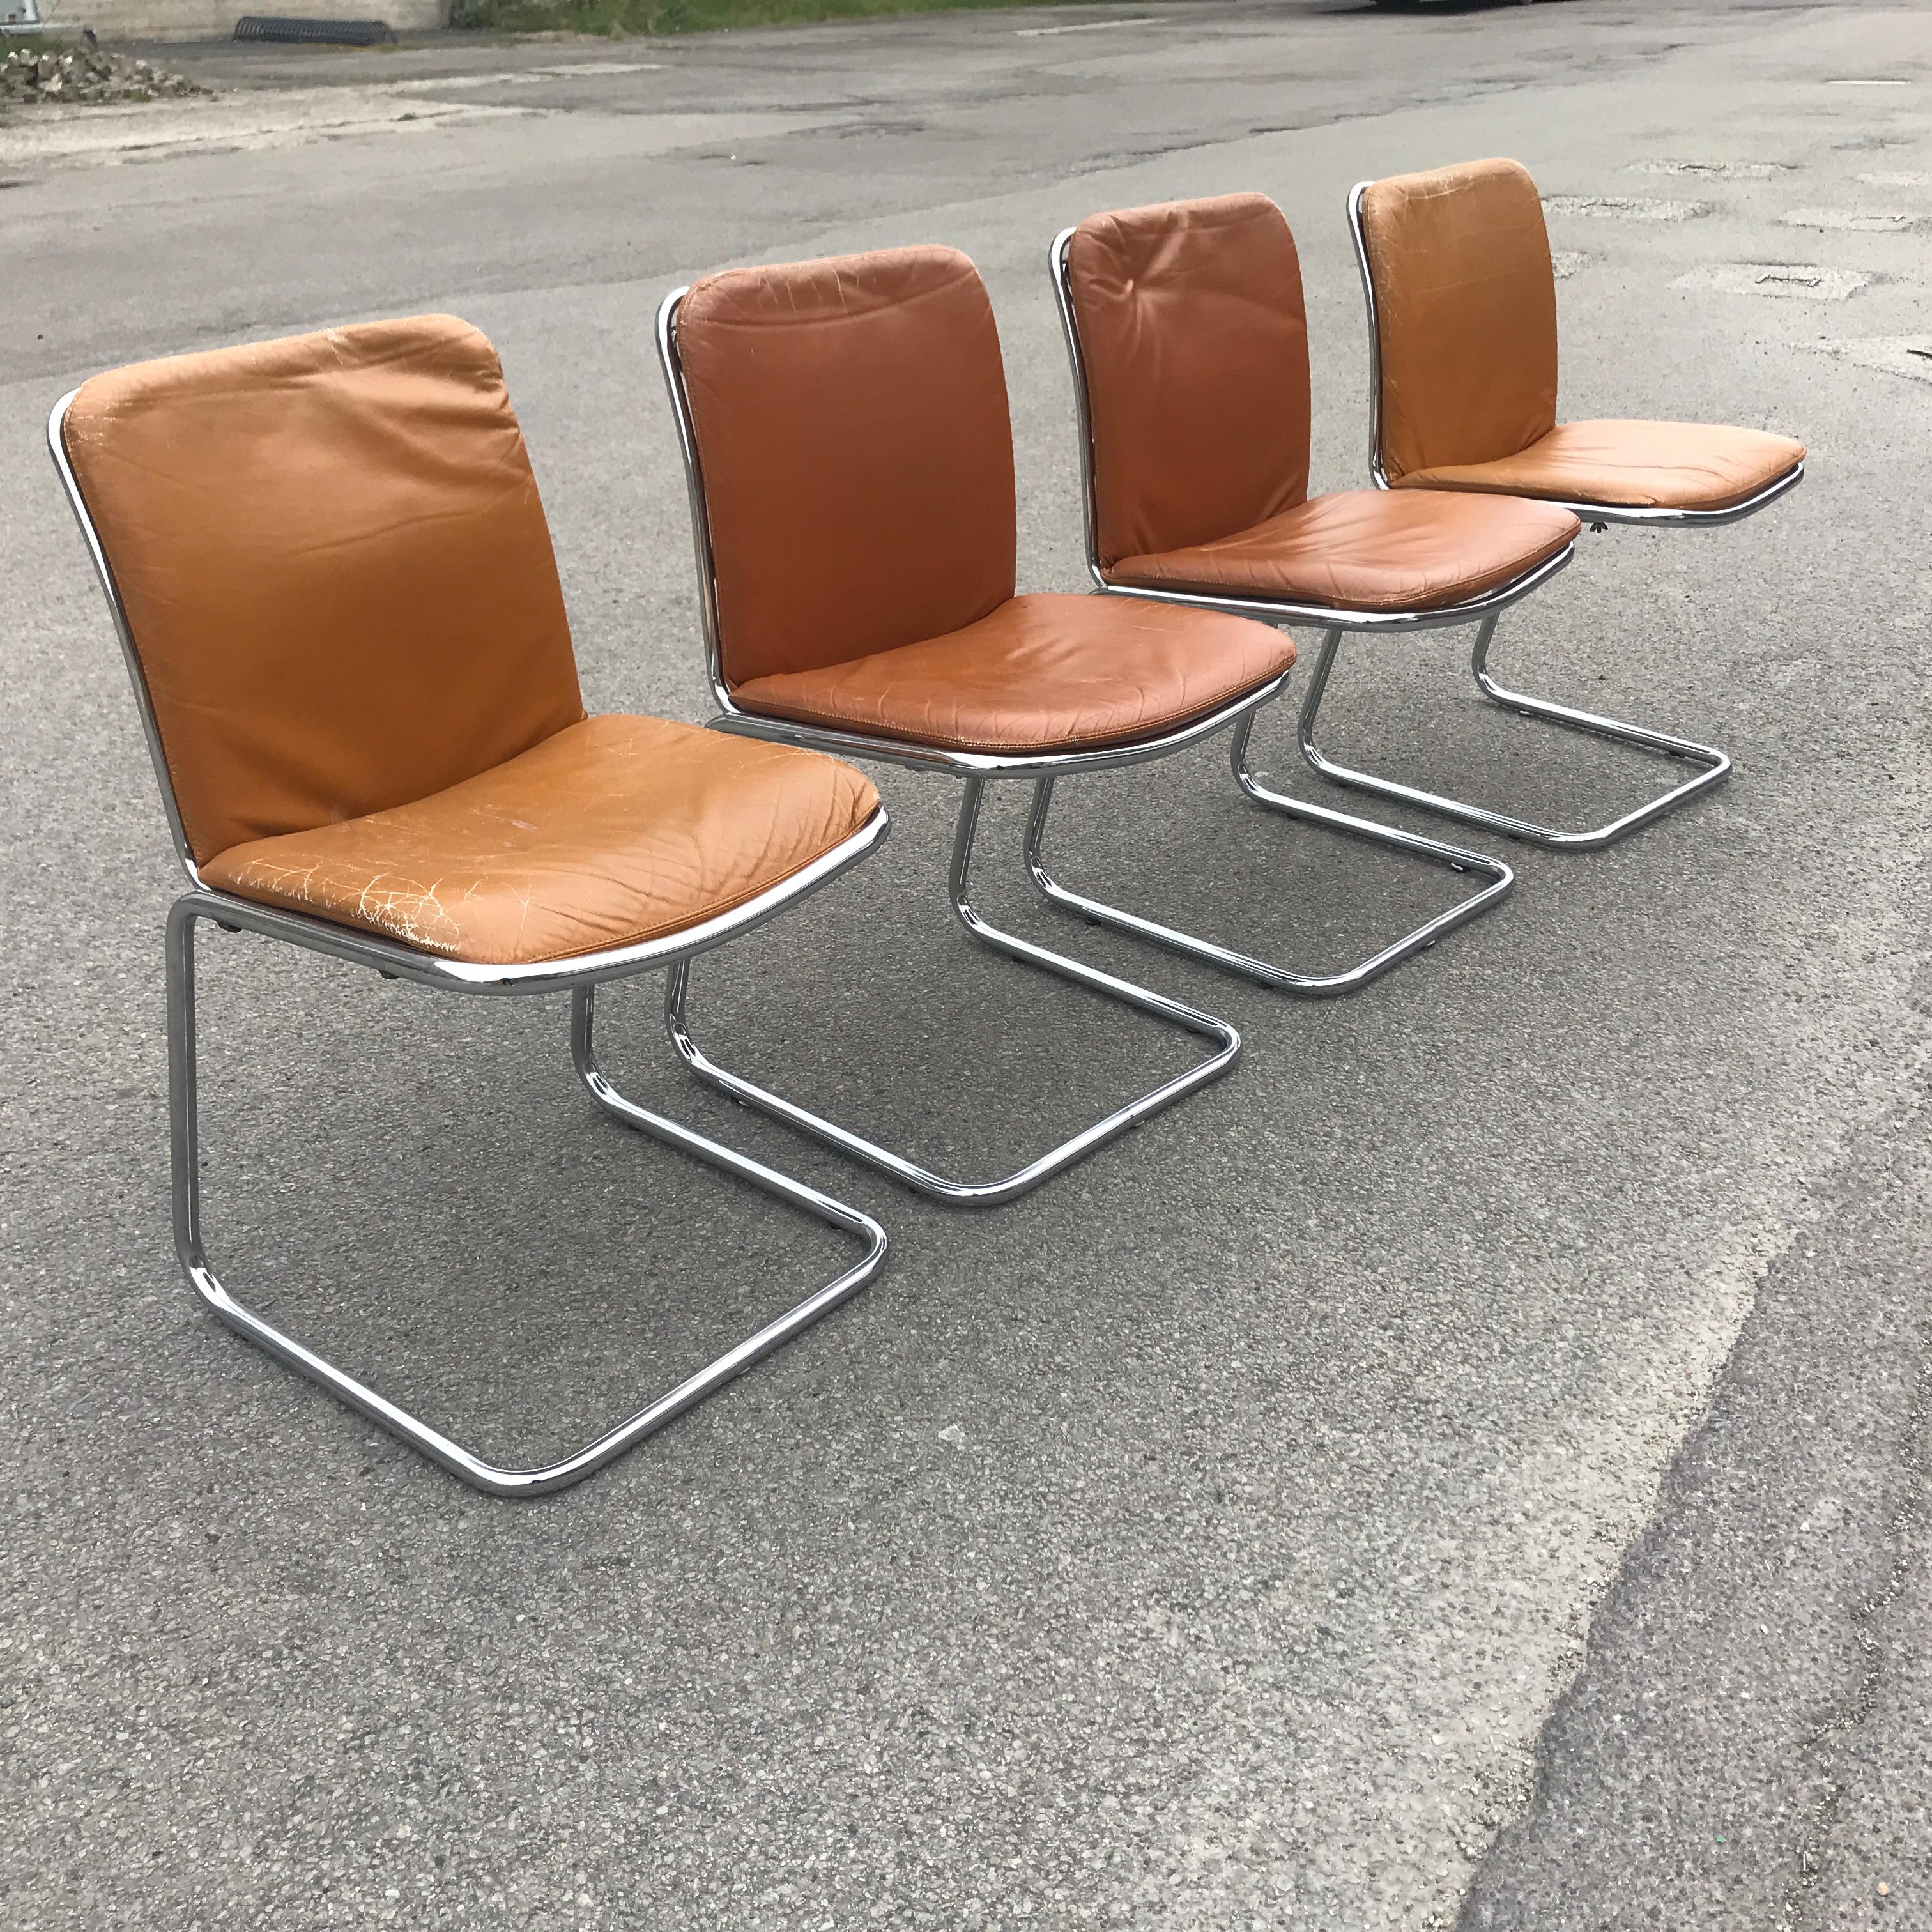 Unique midcentury chrome dining chairs, 1970s.